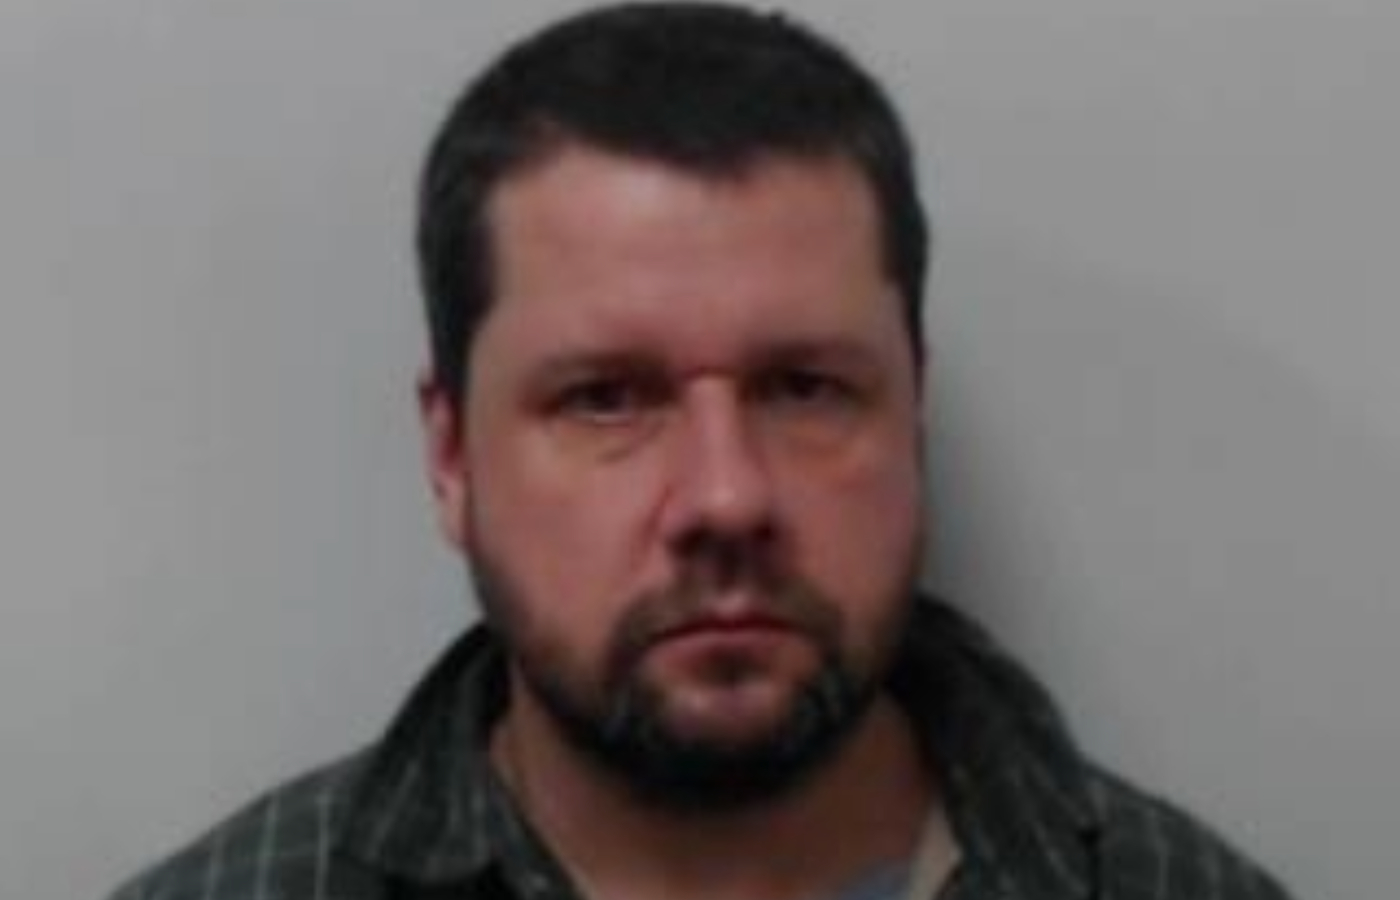 Benjamin Young from Argyll and Bute, was jailed for 12 years